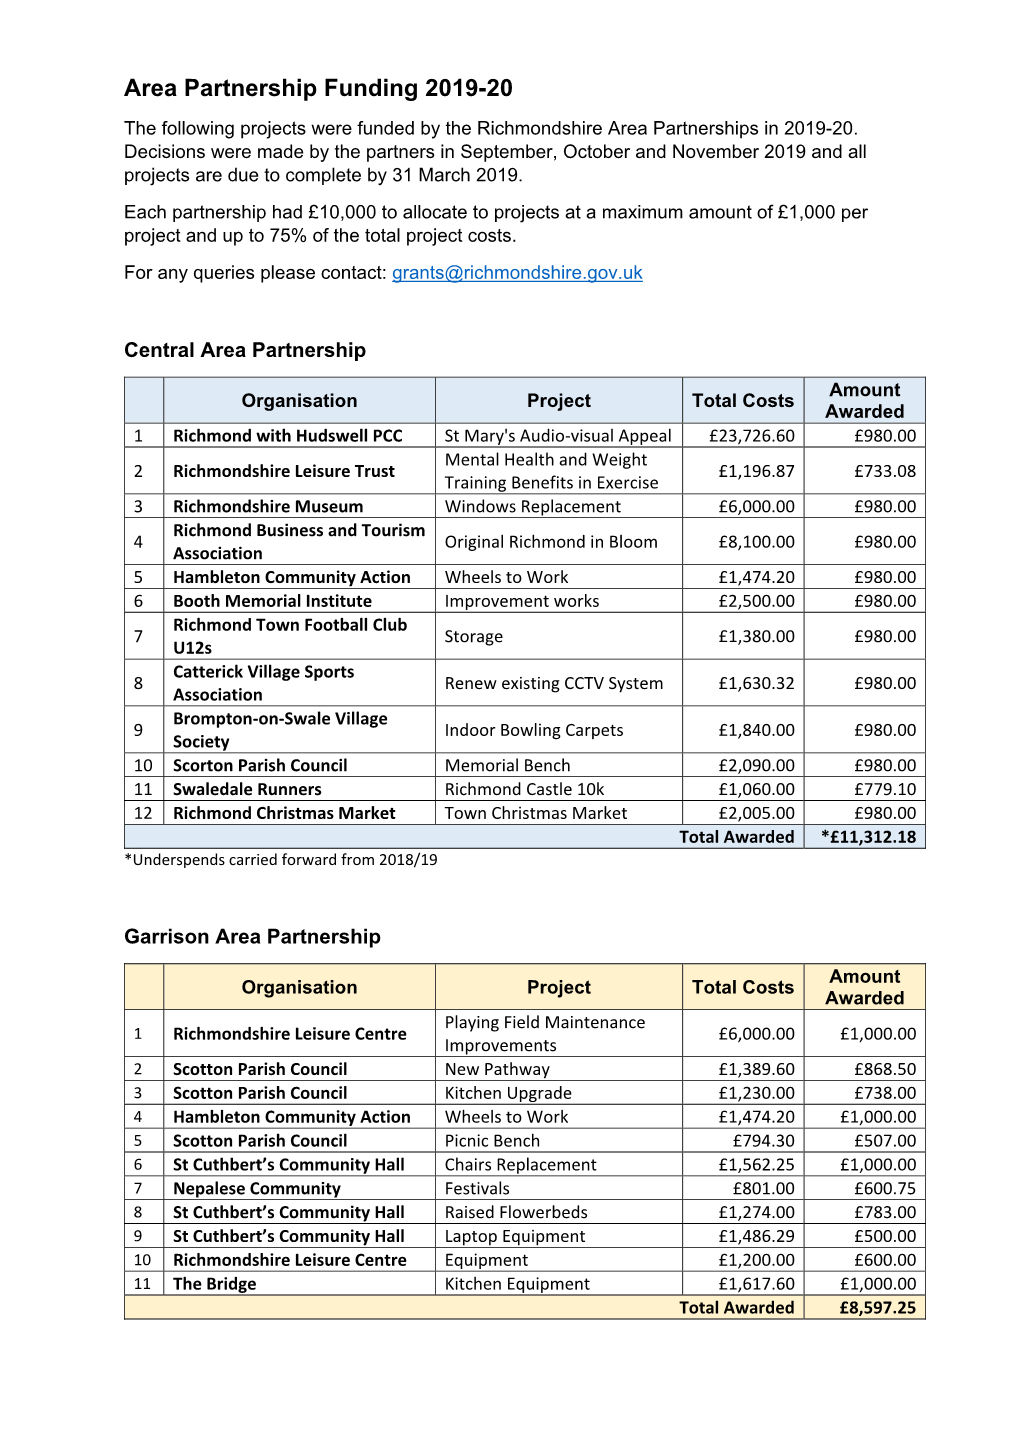 Area Partnership Funding 2019-20 the Following Projects Were Funded by the Richmondshire Area Partnerships in 2019-20